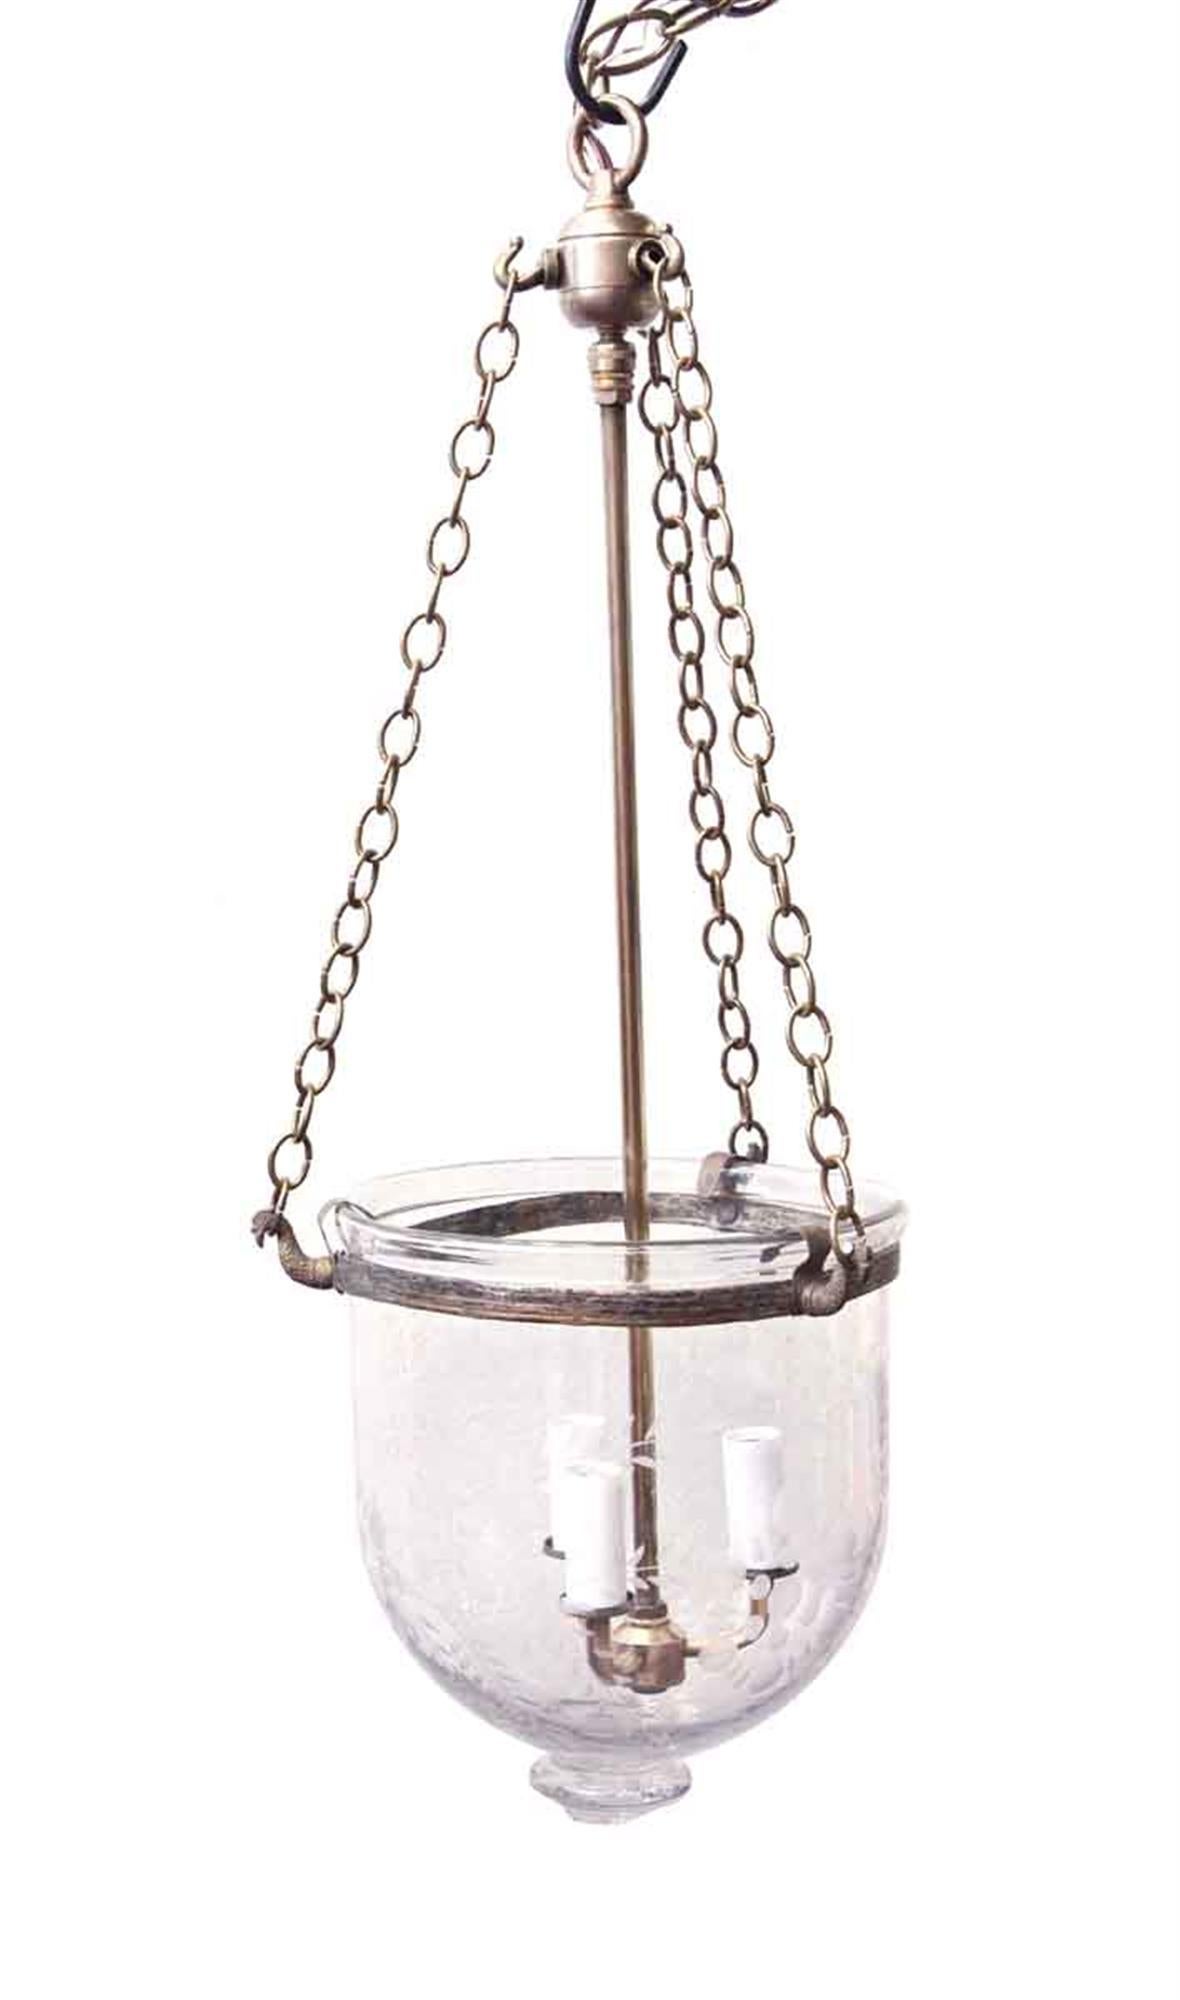 1910s hand blown crystal bell jar light with decorative etched detail and three candlestick lights. This light has been completely restored with new wiring and brass hardware. The globe, trim and finial are all original. This can be seen at our 2420